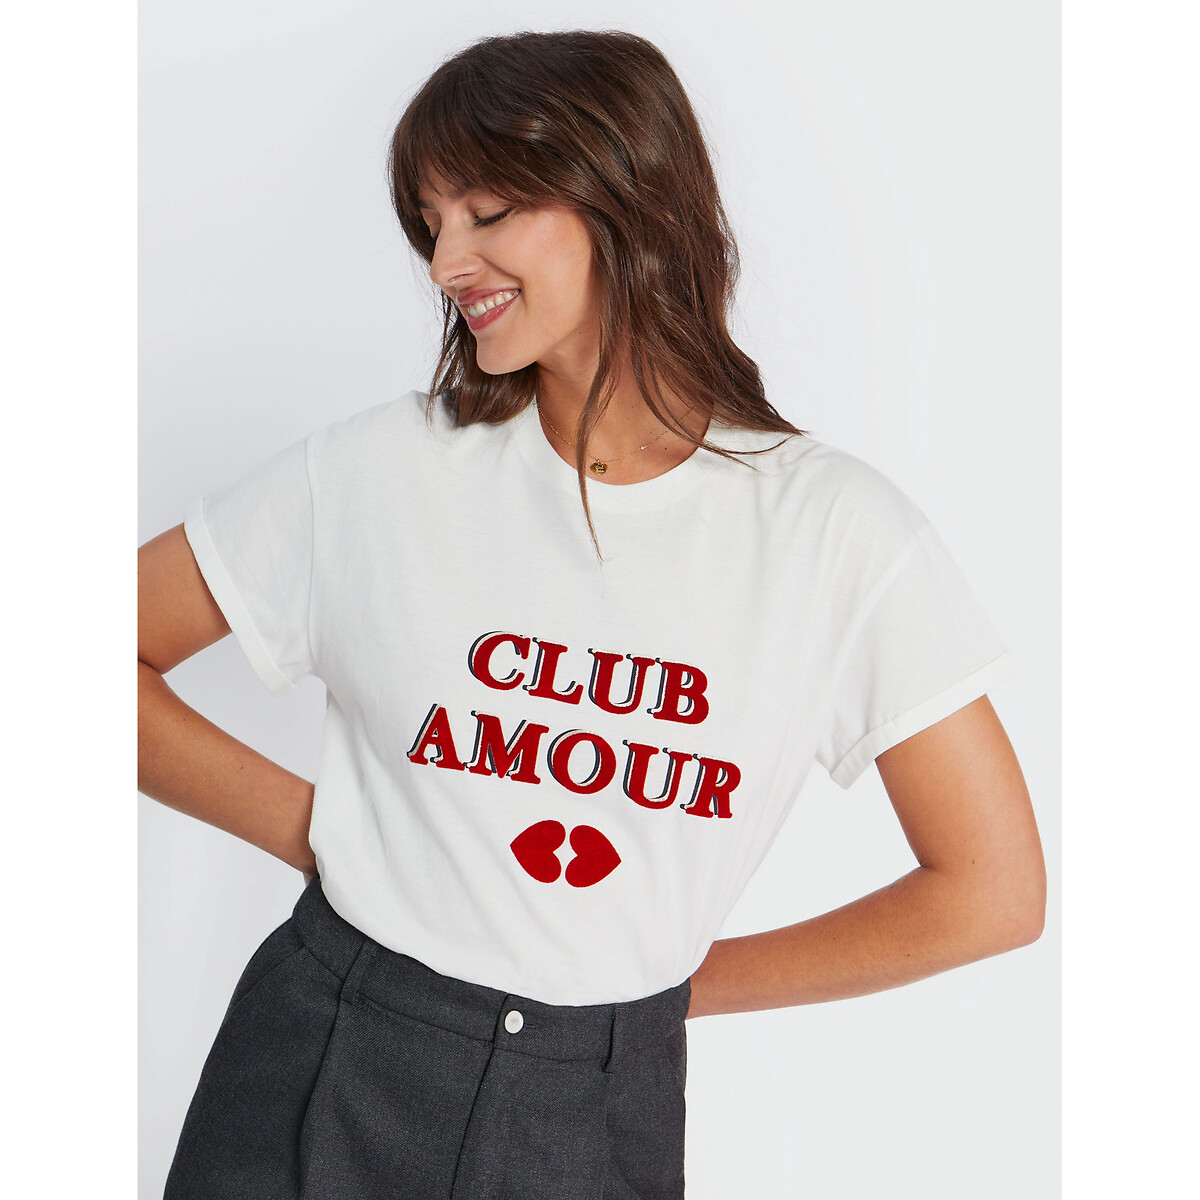 Cotton Club Amour T-Shirt with Short Sleeves